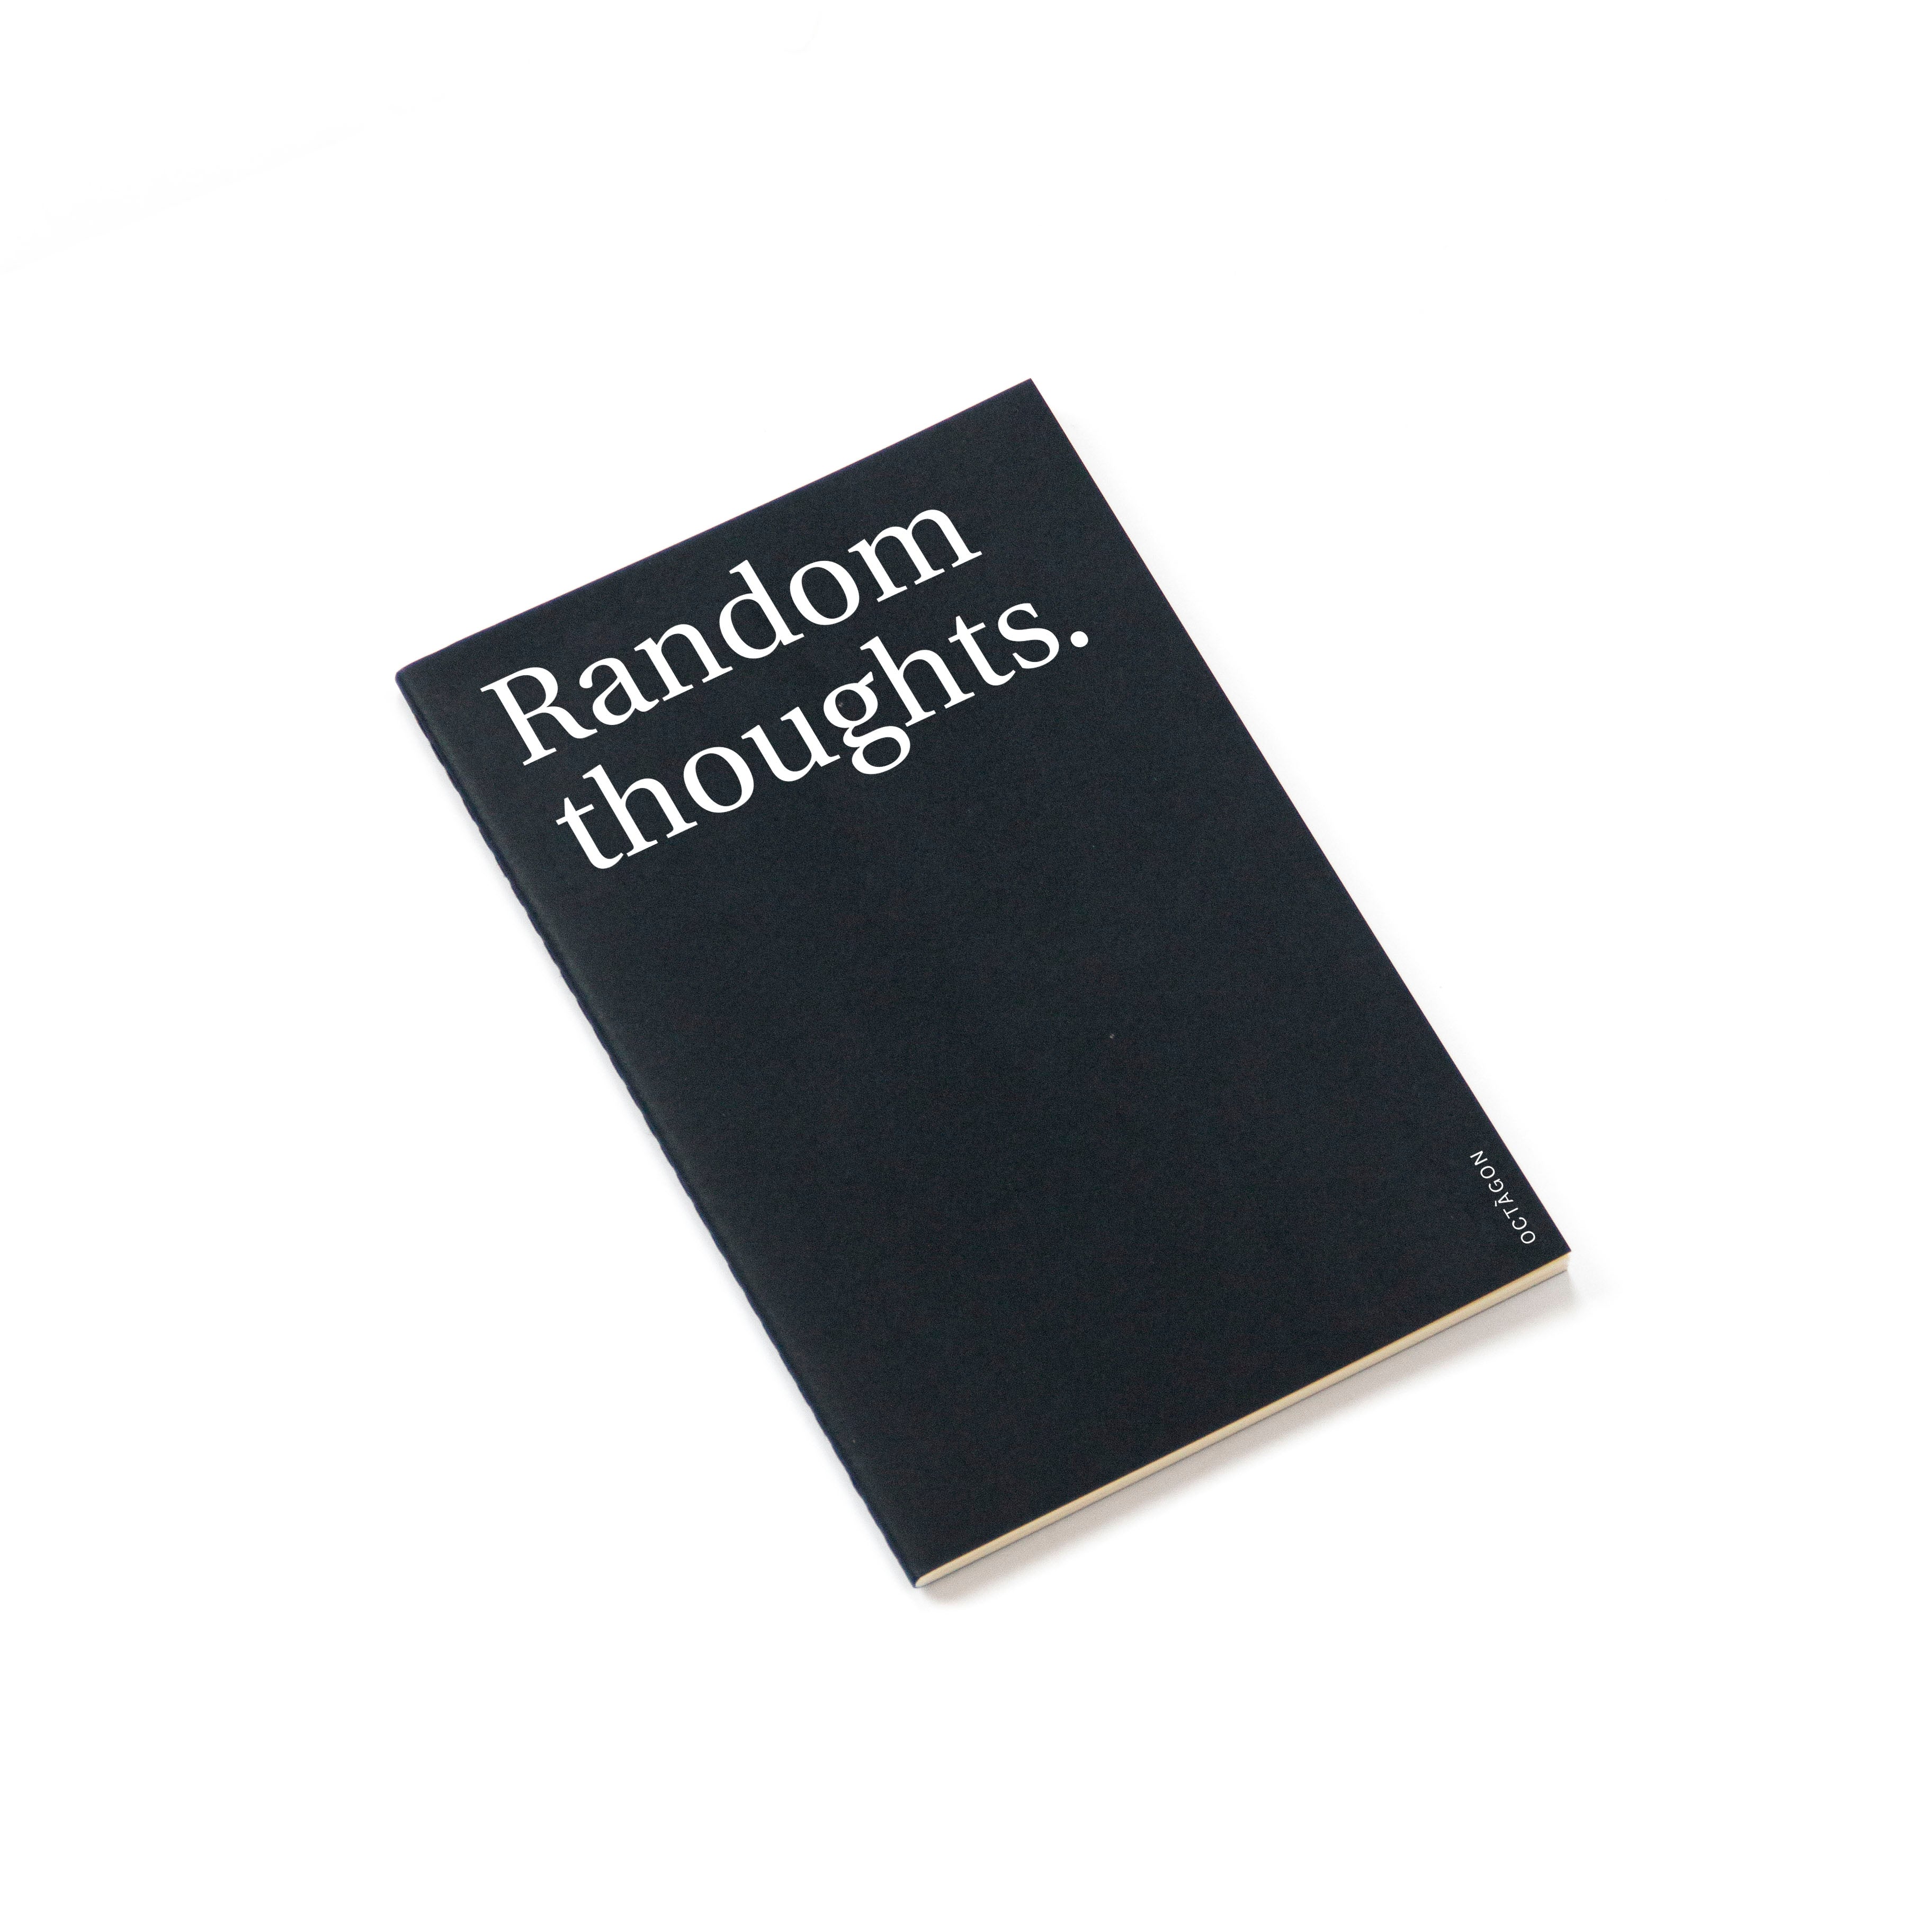 "Random thoughts" thin notebook. Cover black color and white typography.